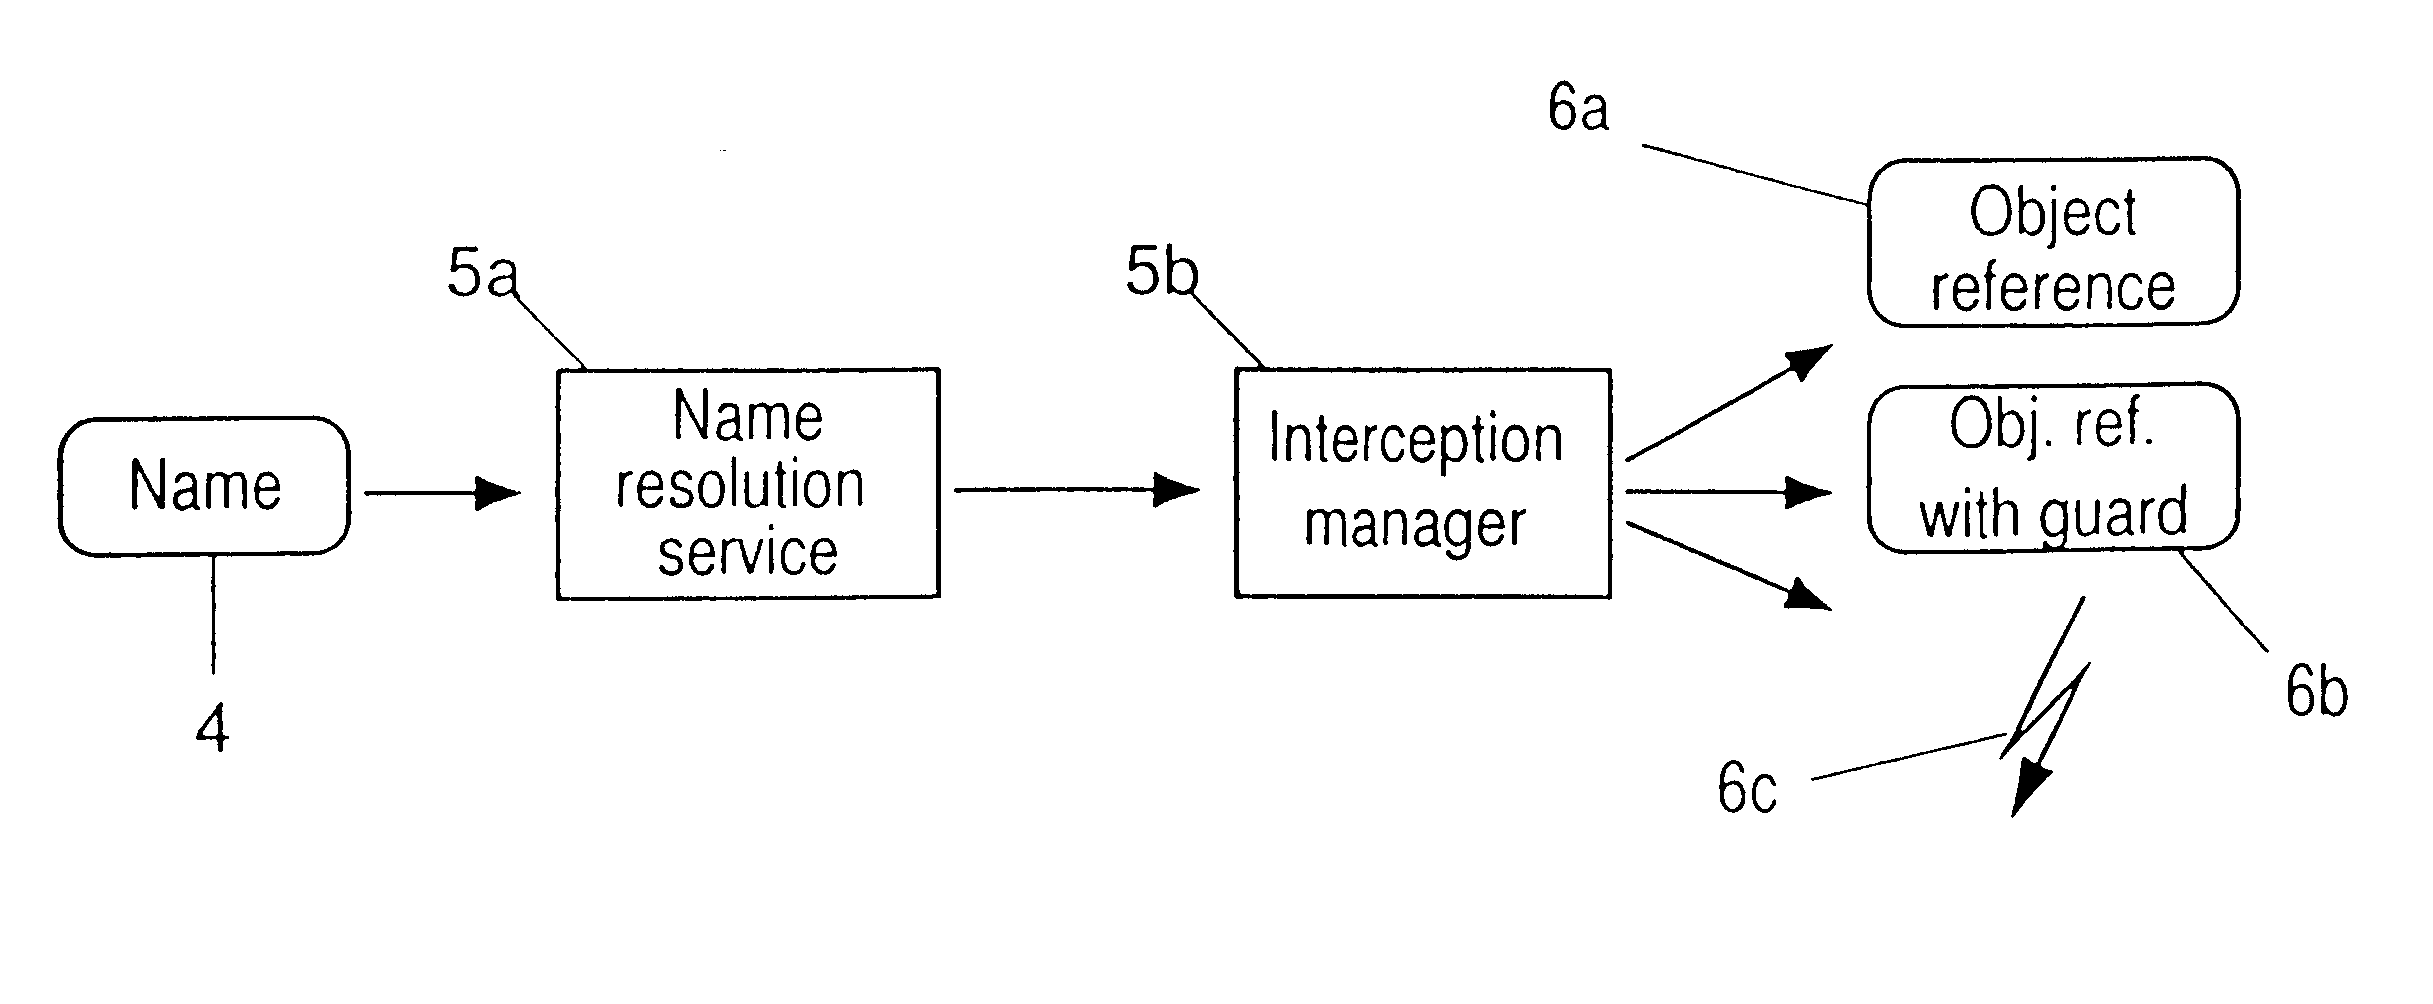 Protecting resources in a distributed computer system